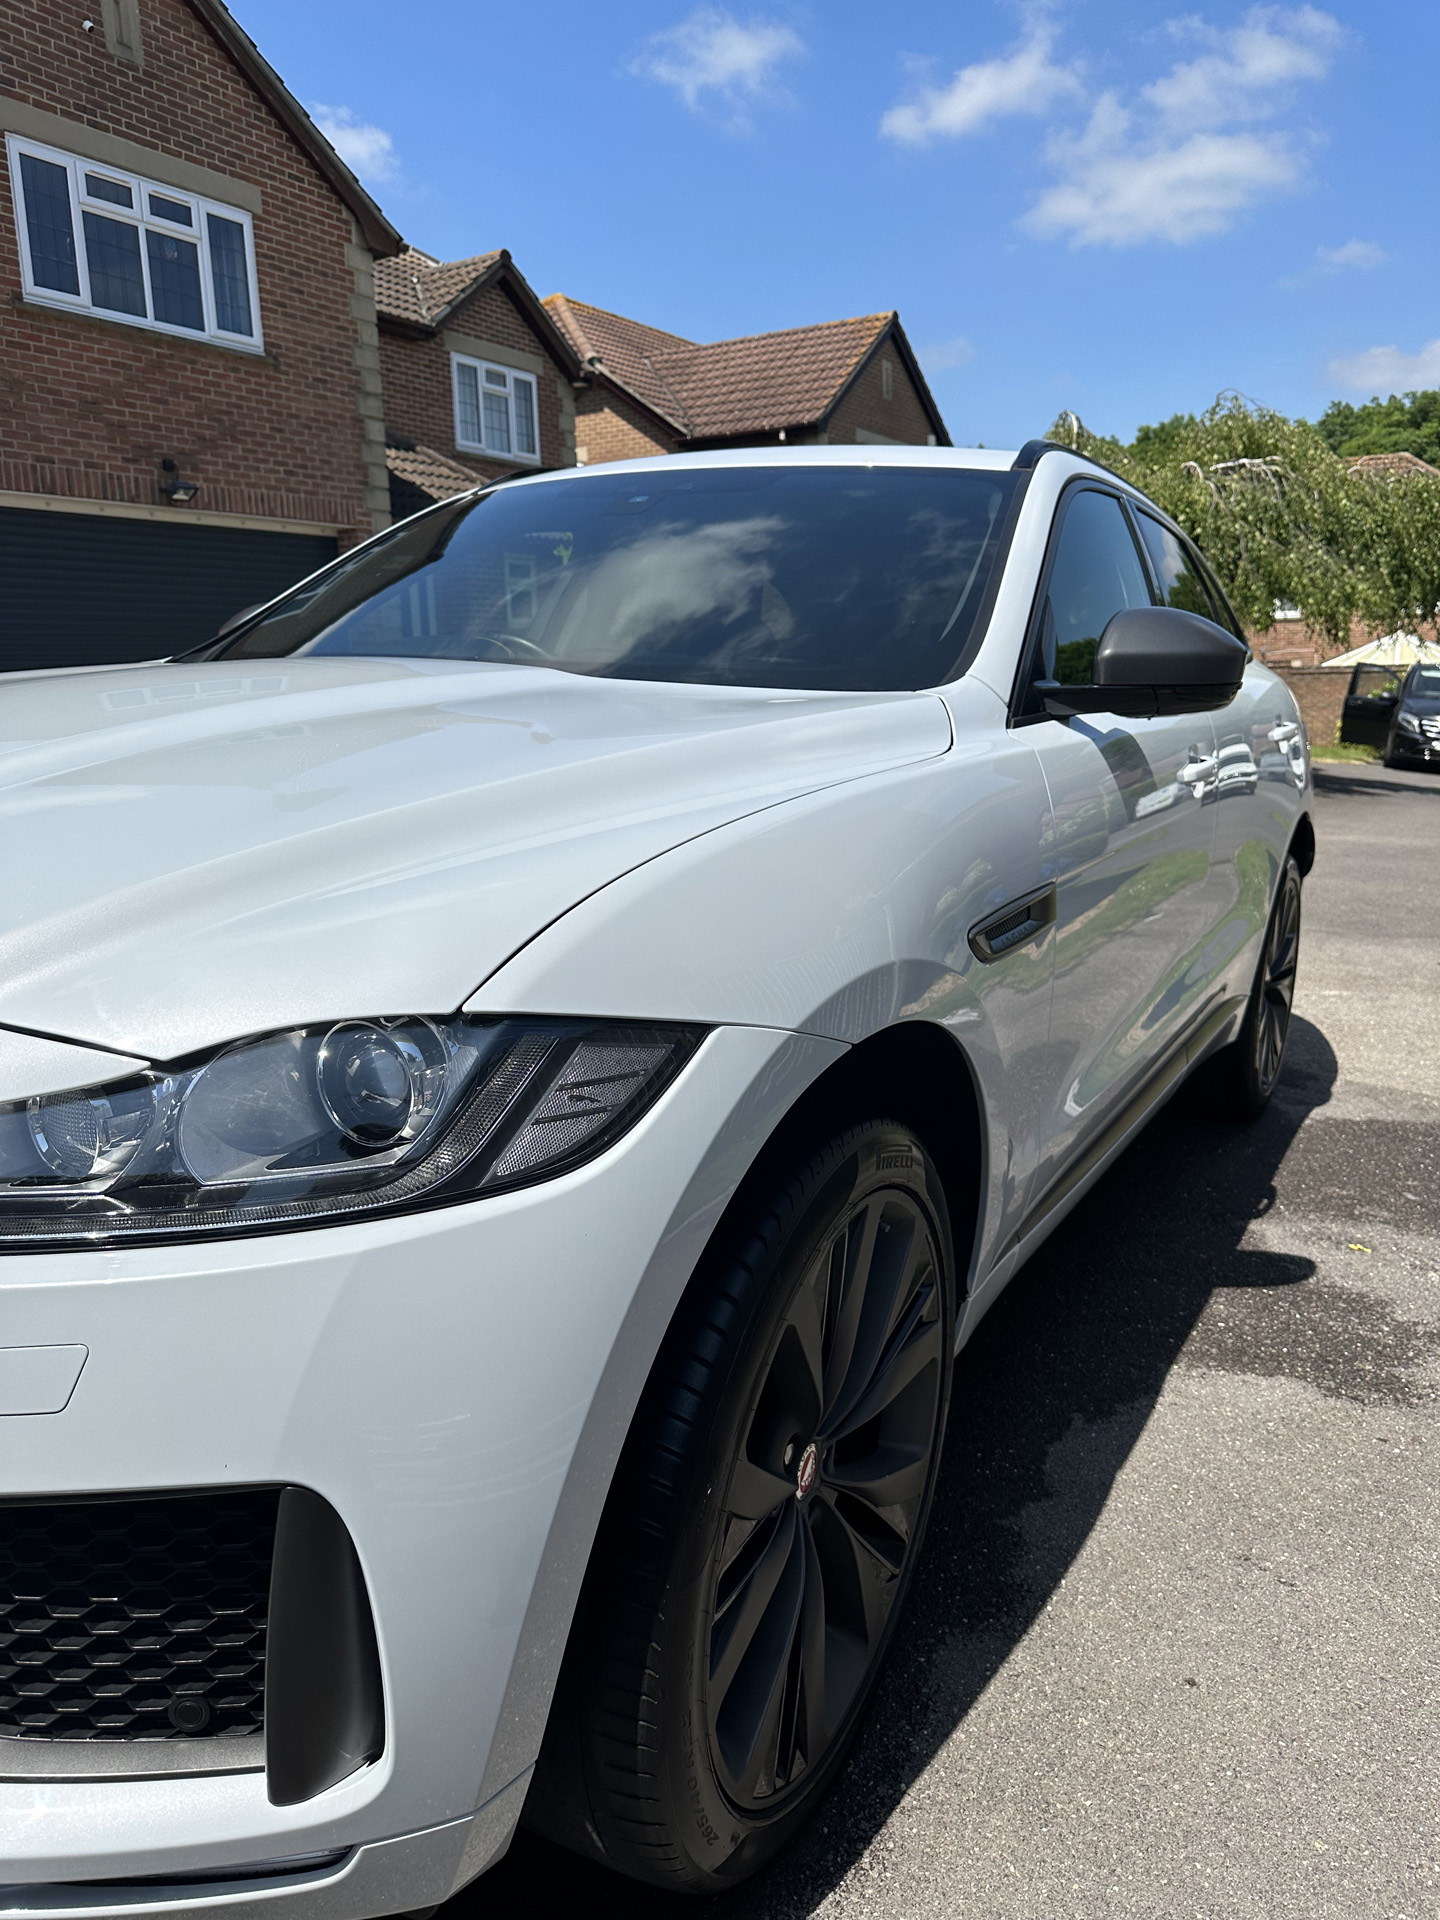 Local Southampton Detailing Packages